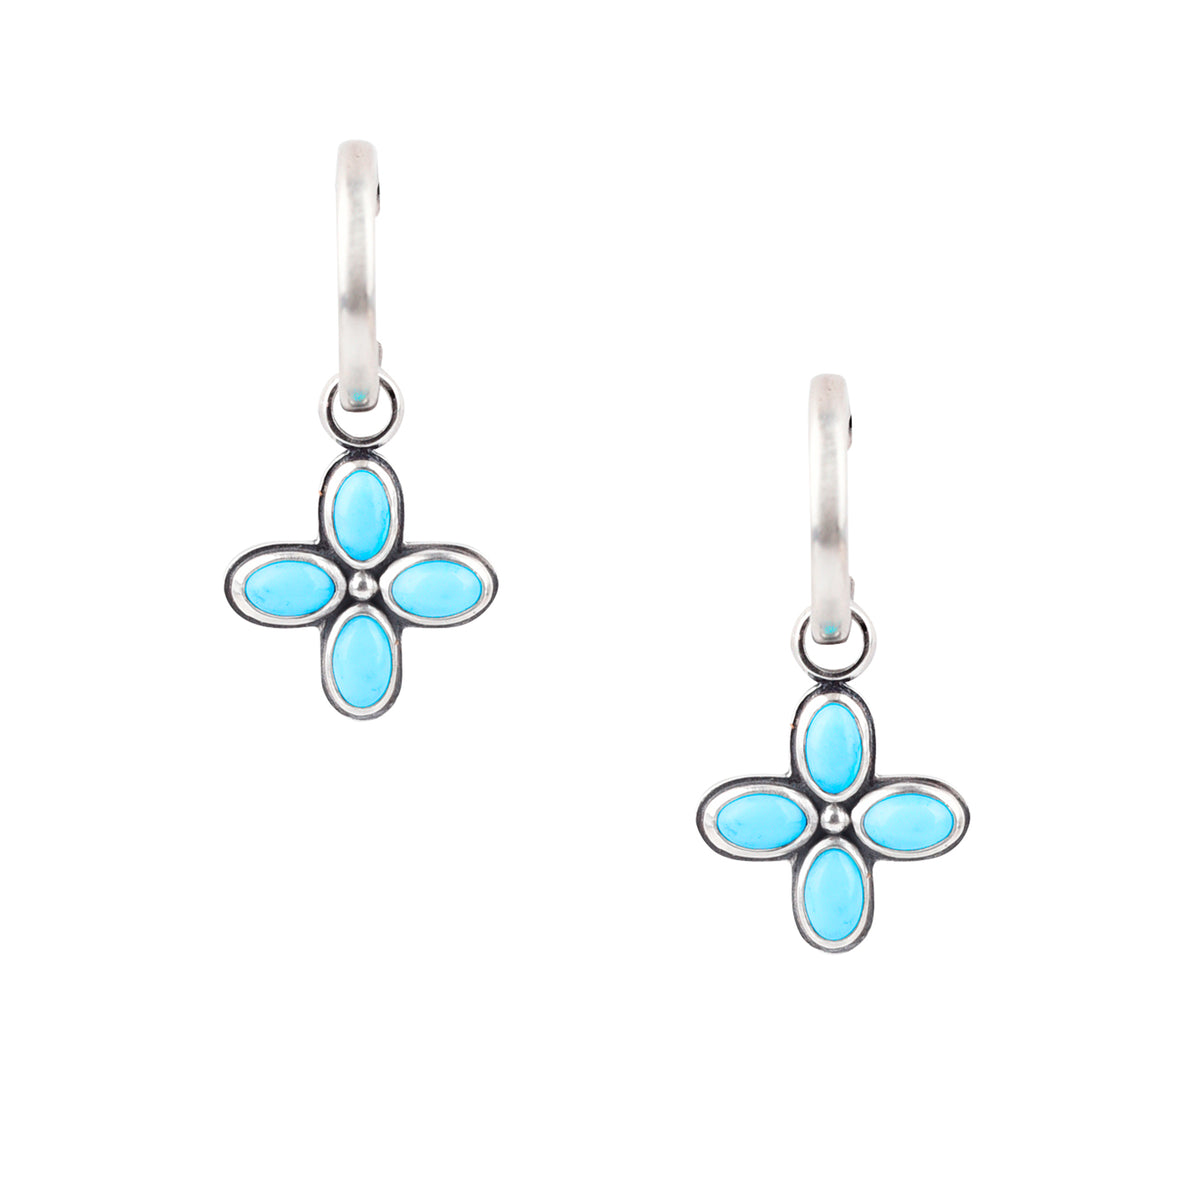 Single-Sided Turquoise Clover Hoops by Dennis Hogan | COWGIRL Heirloom by Peyote Bird